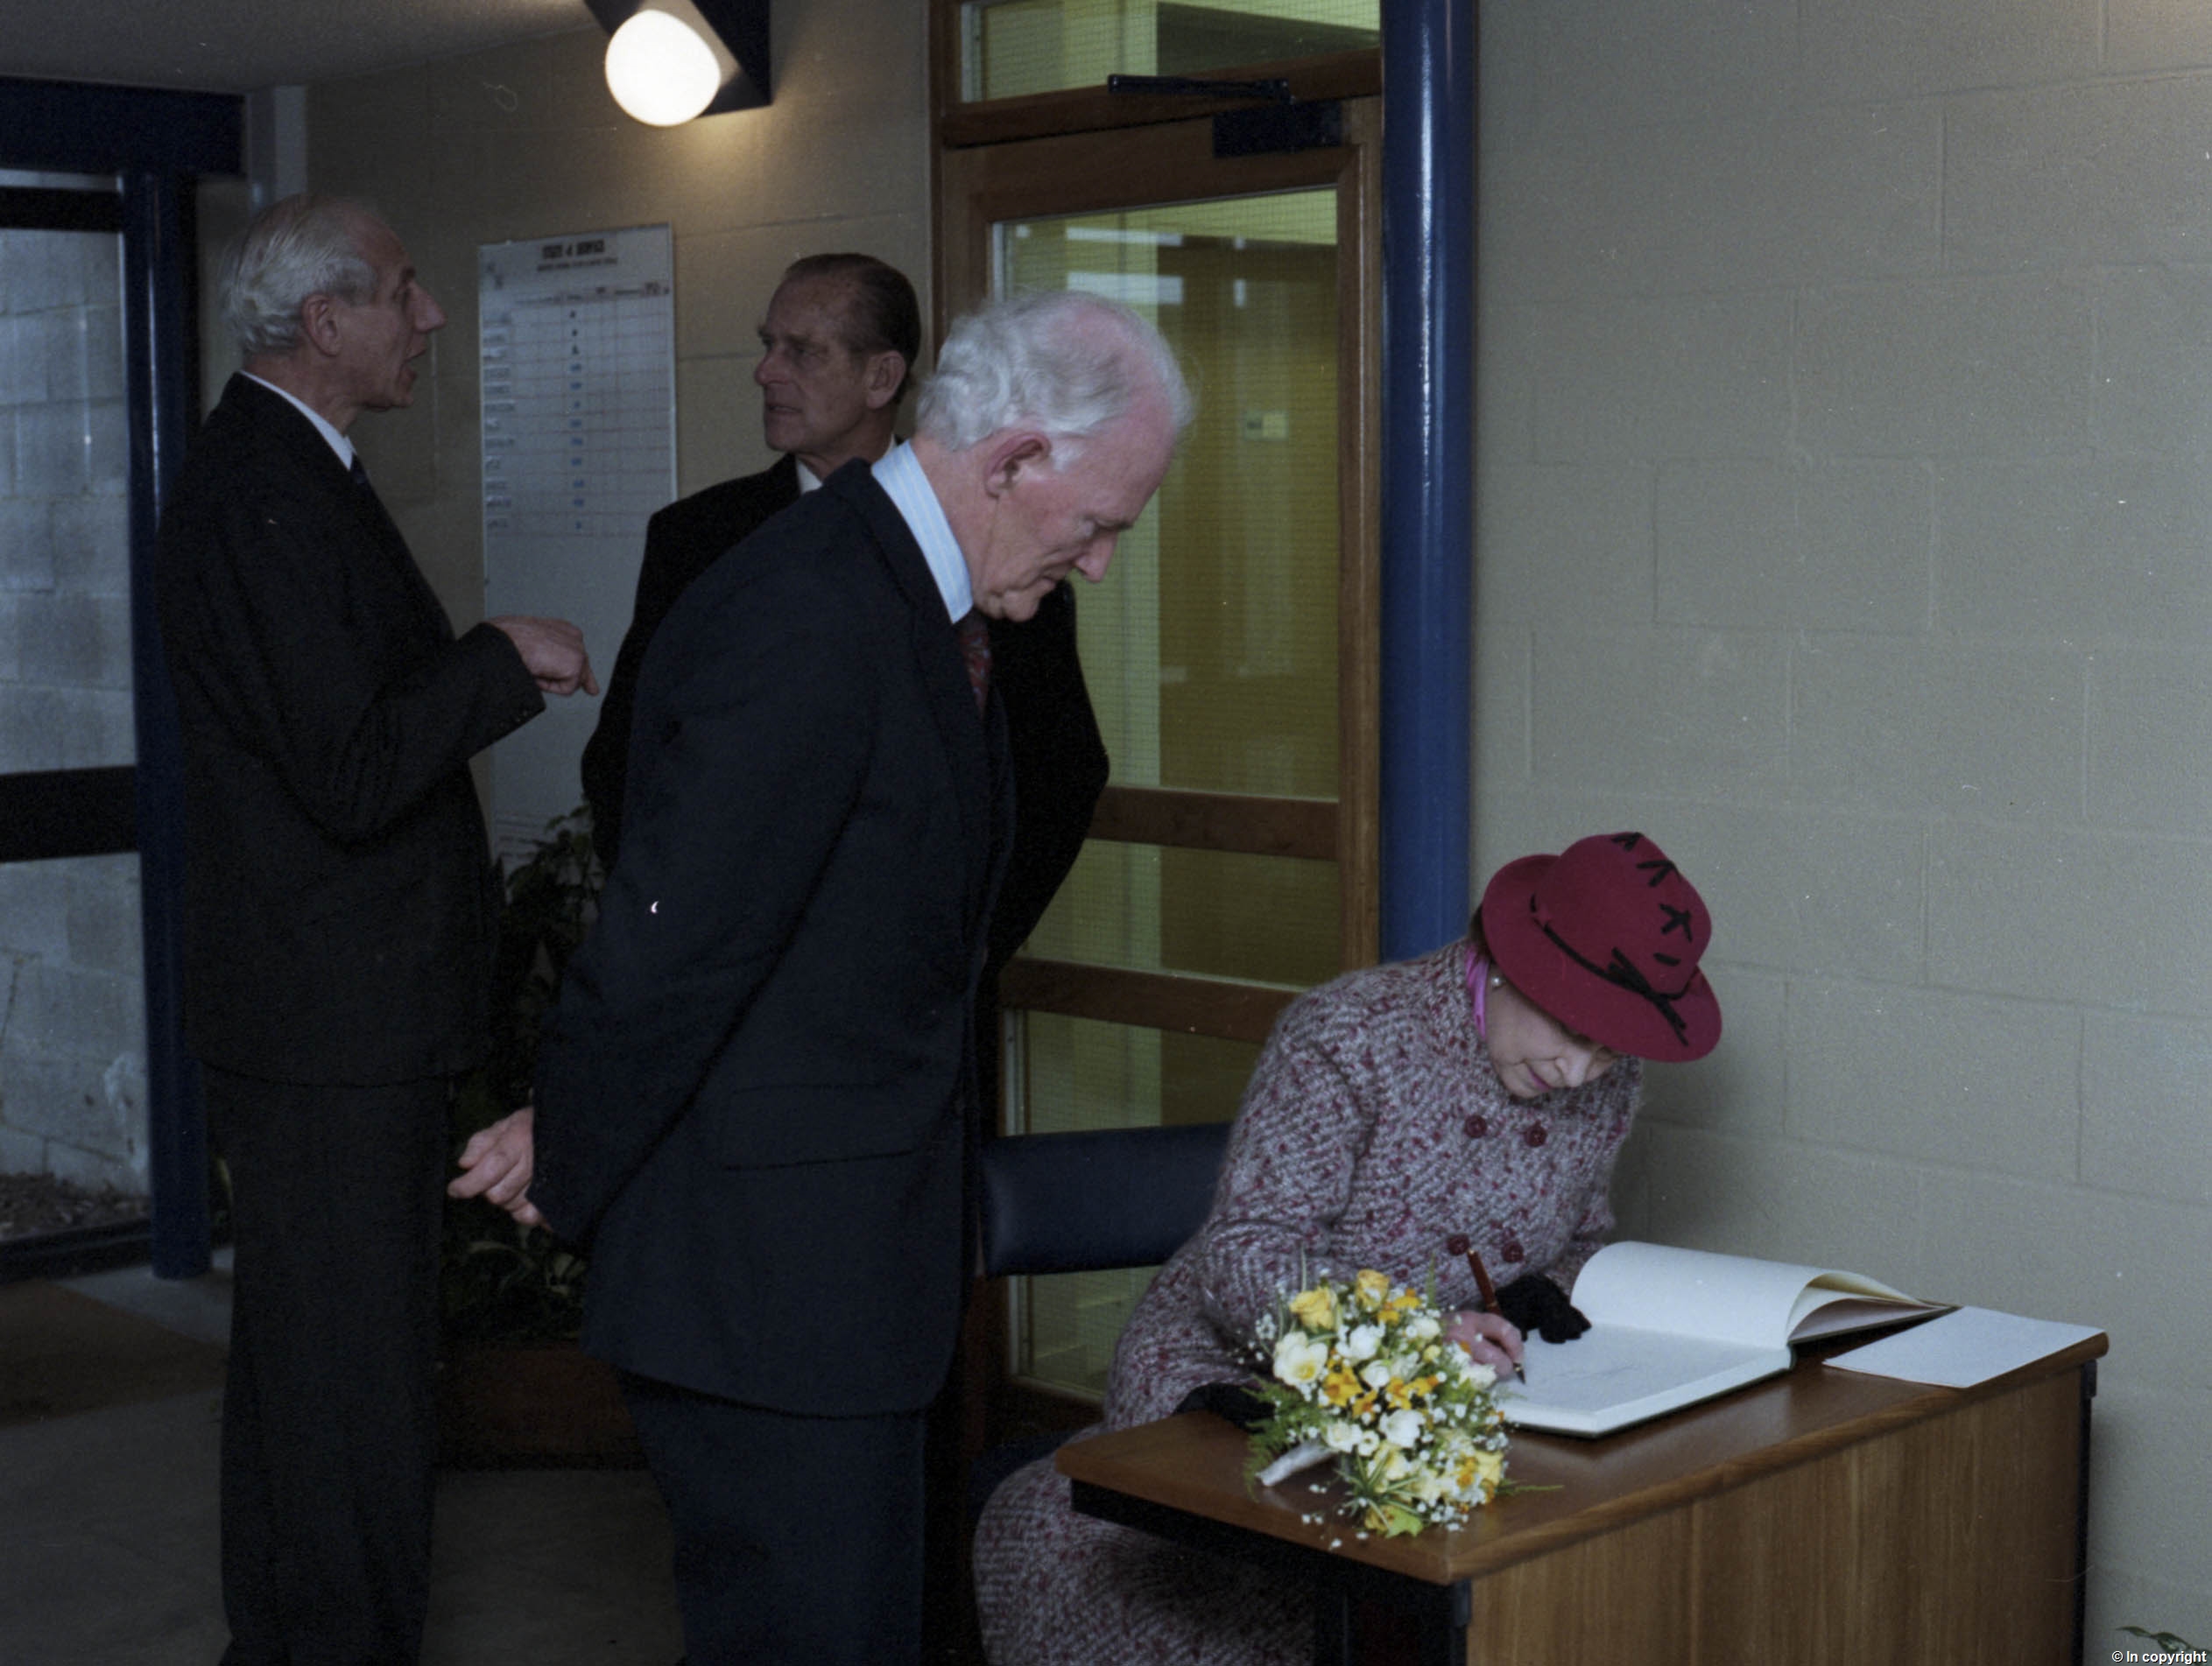 Queen signing the University visitor book when she and Philip came to open the Cornwallis extension (the Octagon)